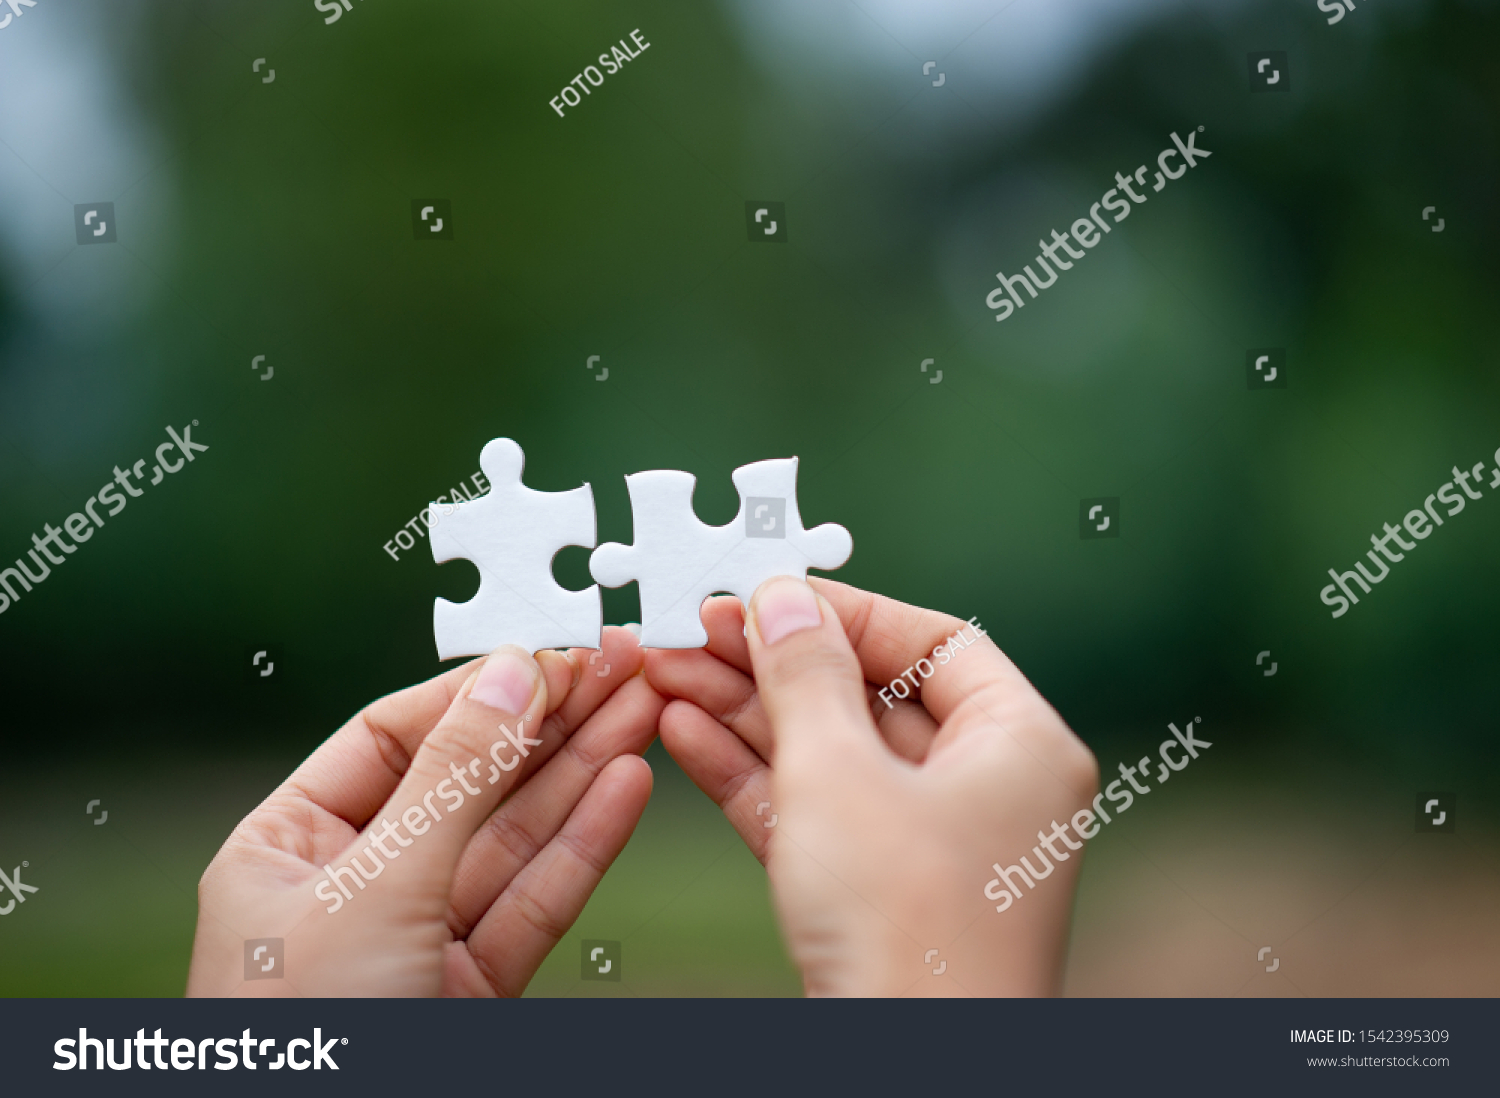 Hands and puzzles, important pieces of teamwork Teamwork concept #1542395309